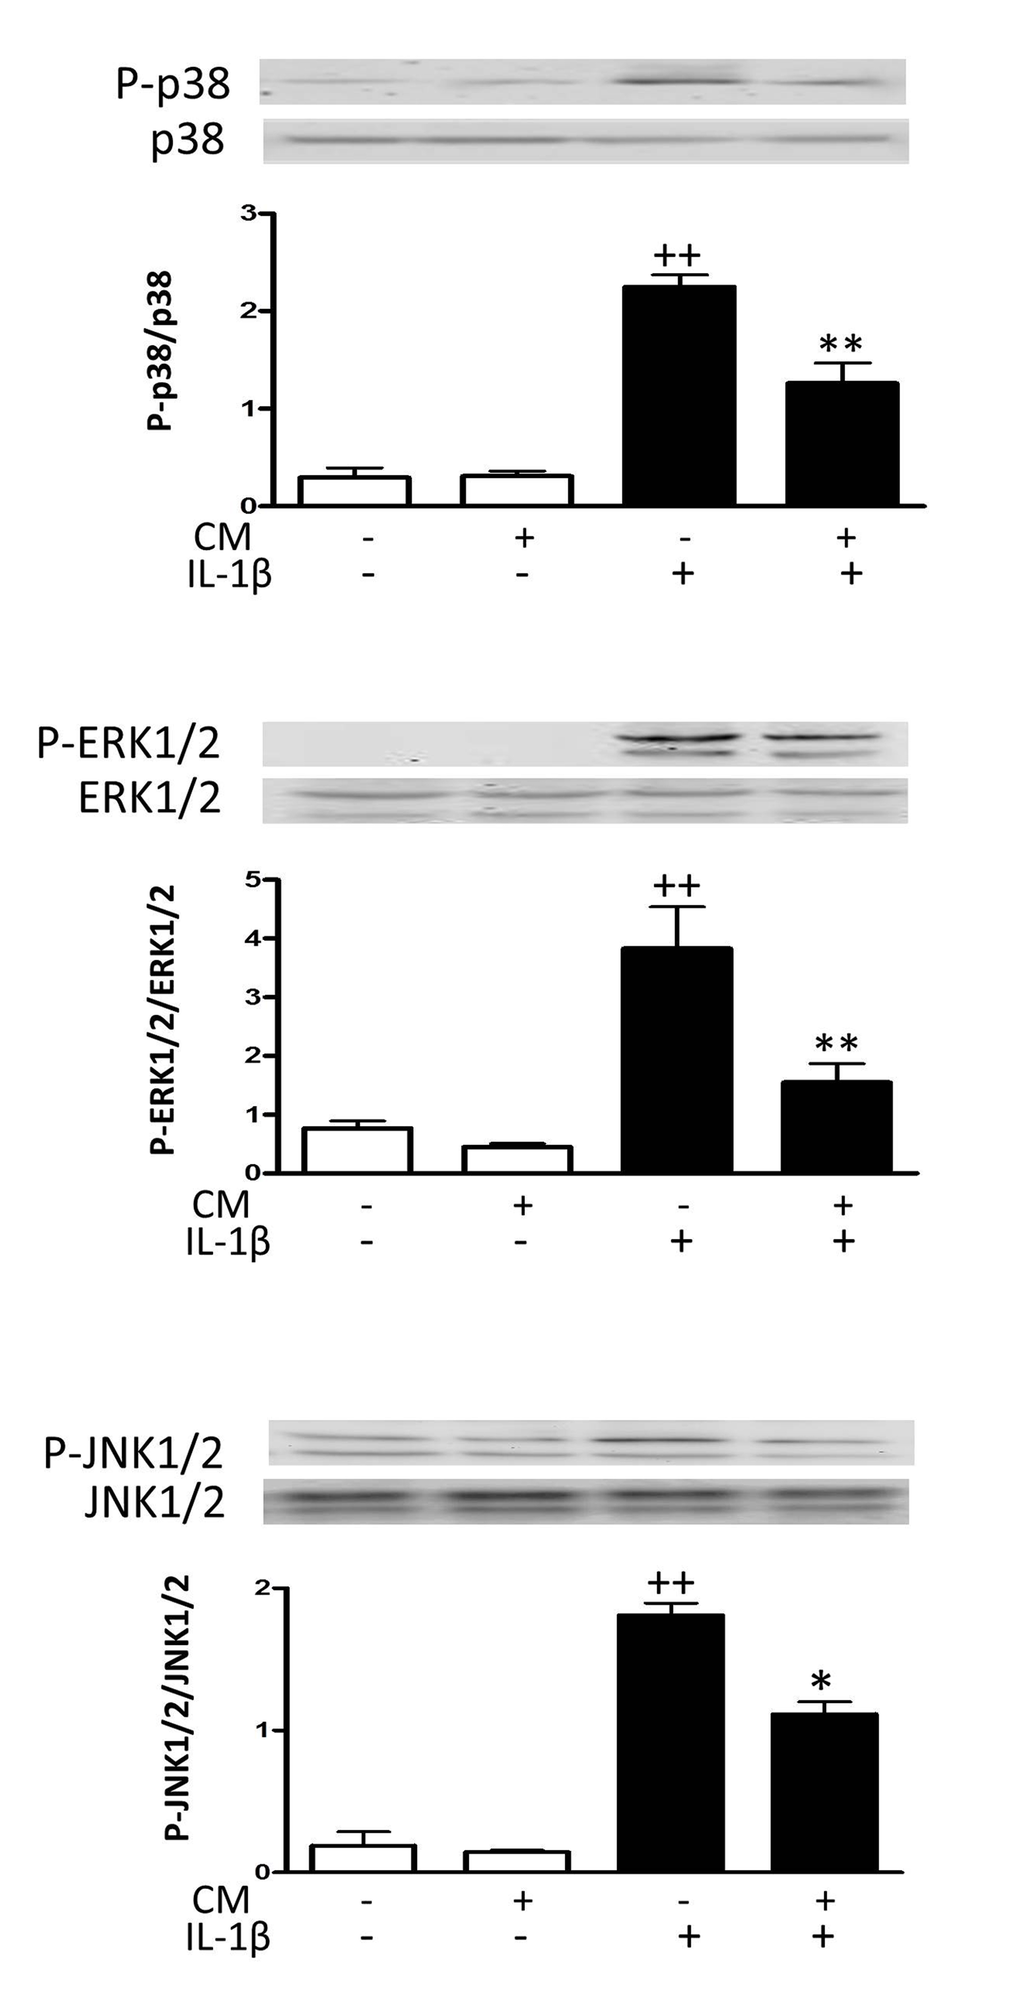 Effect of CM on MAPK. OA chondrocytes were incubated with IL-1β and/or CM for 15 min and immunoblotting was performed for phosphorylated and total p38, ERK1/2 and JNK1/2. Data are shown as mean±standard deviation of N=3 separate experiments with cells from separate donors. ++p